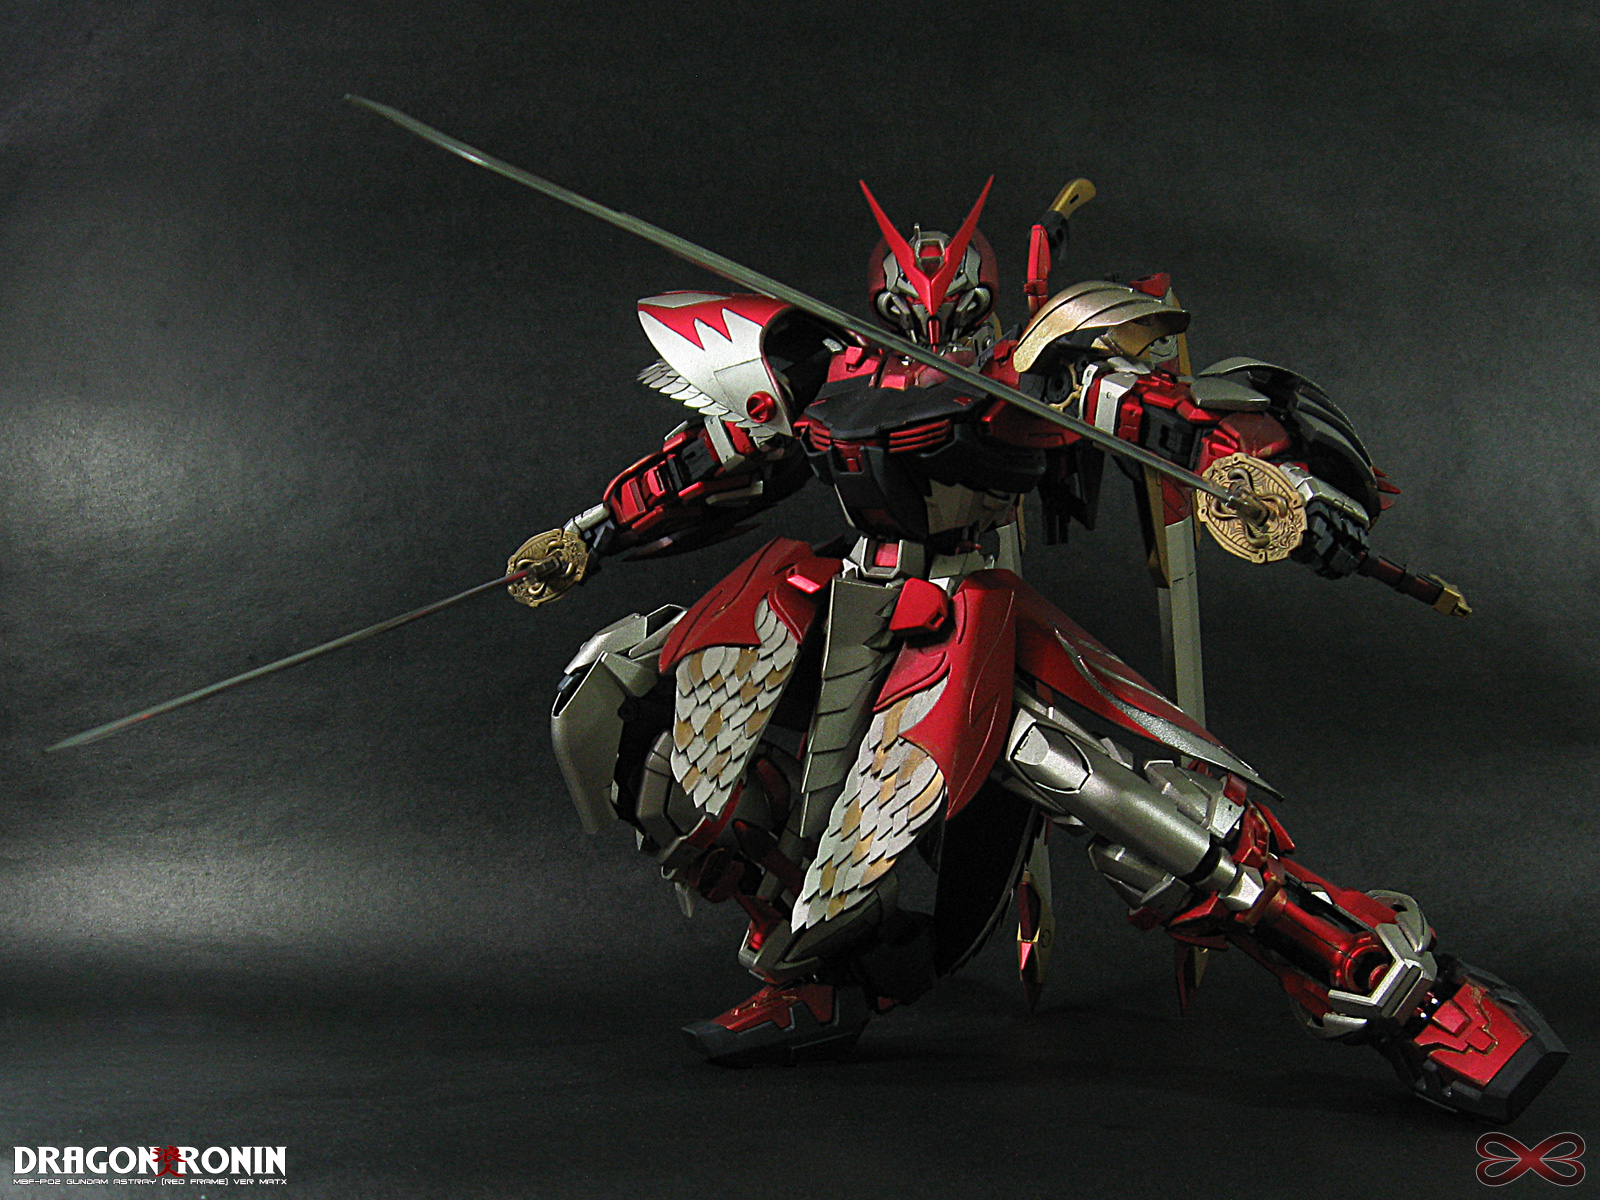 Gundam Astray Red Frame “Dragon Ronin”: Photoreview Wallpaper Size Image. Great Work